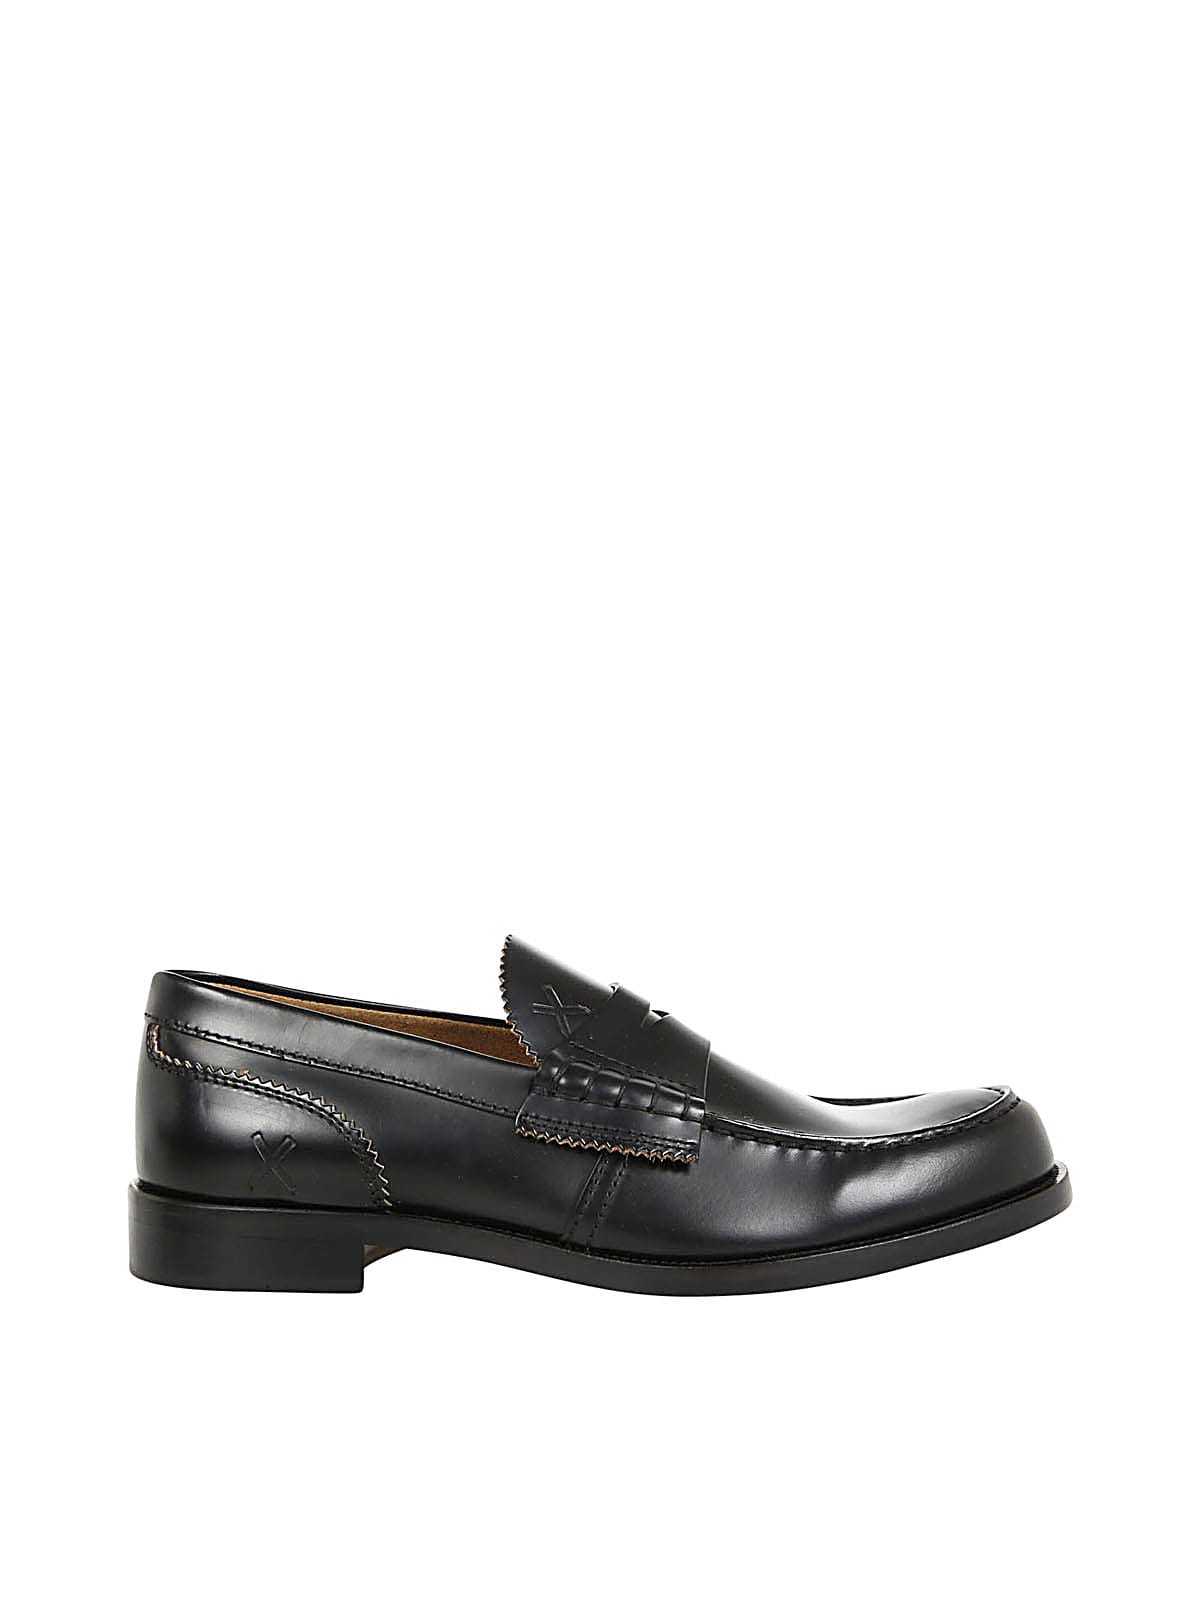 COLLEGE CROSS PRINT LOAFERS